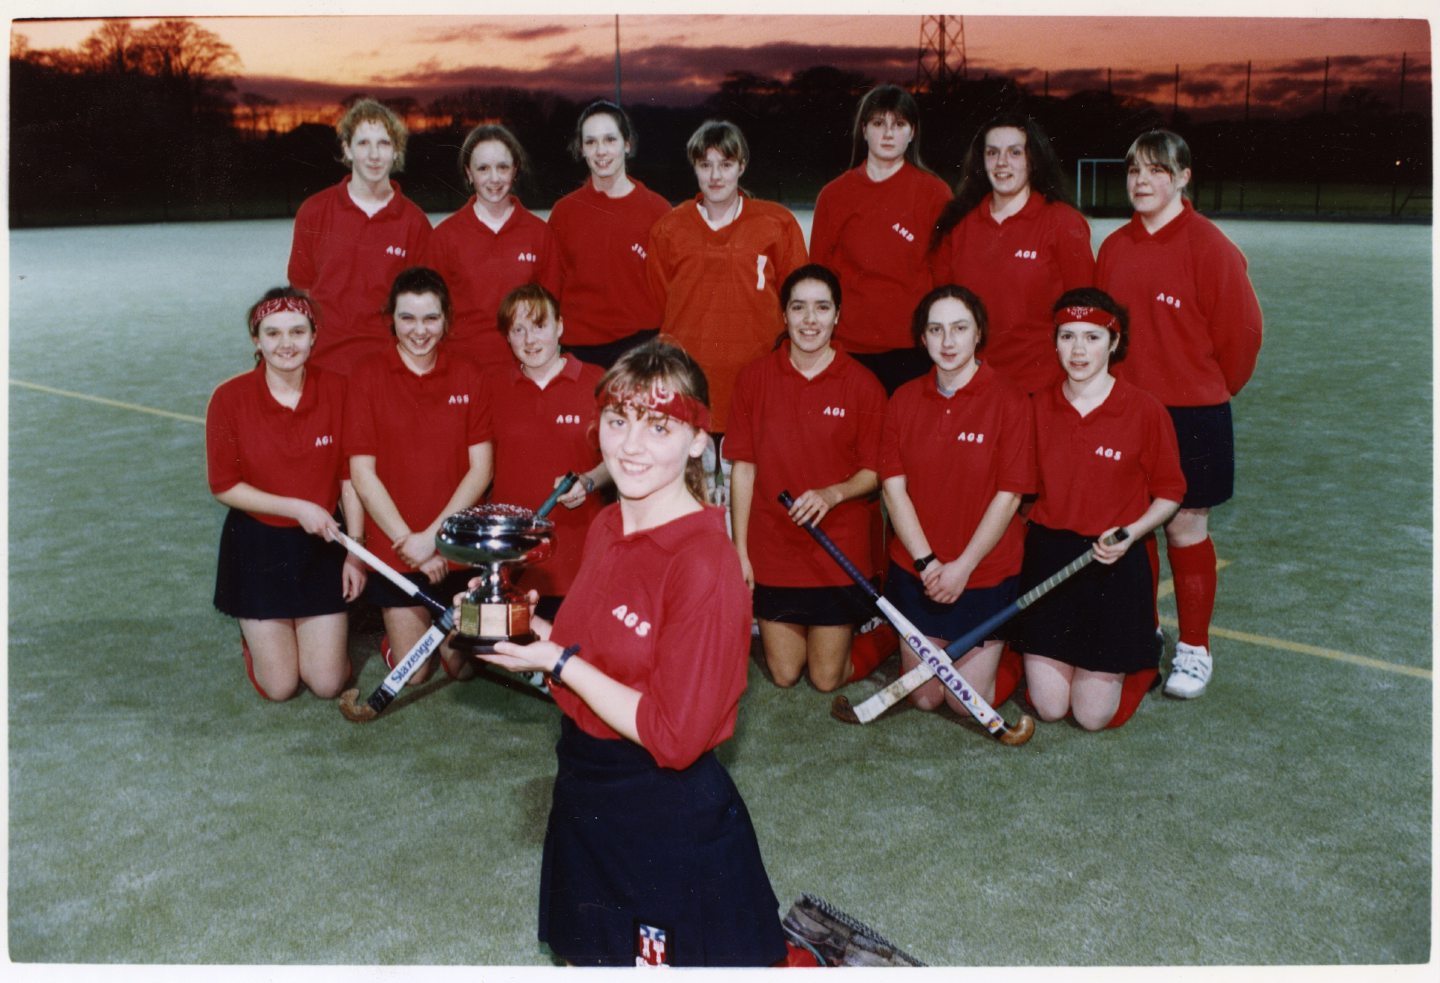 Grammar School hockey team after winning the senior North District Knockout Cup in 1993.